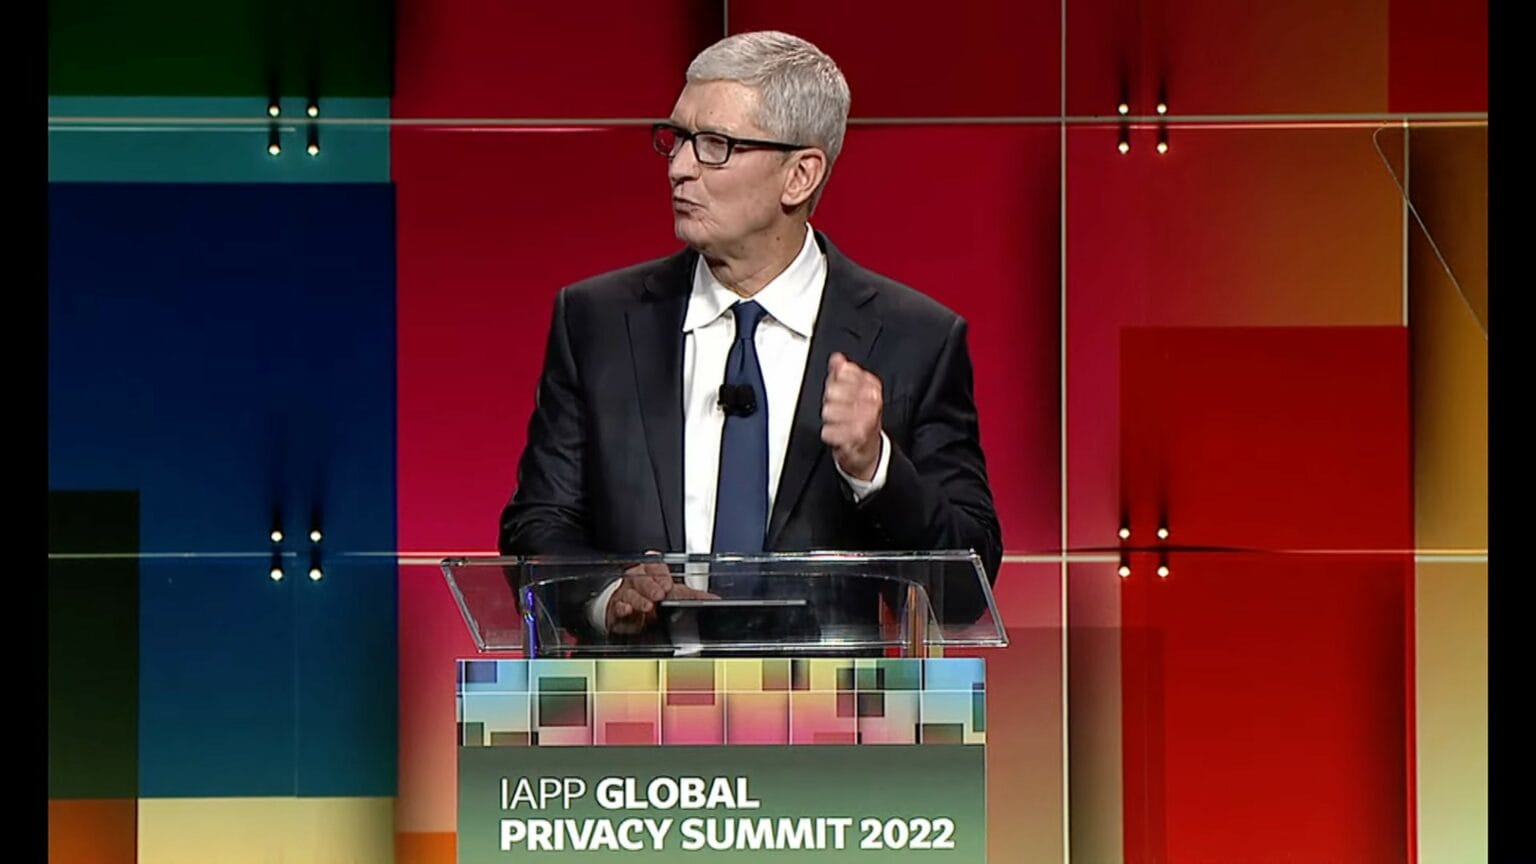 Tim Cook delivered a keynote address at the International Association of Privacy Professionals Global Privacy Summit on Tuesday.